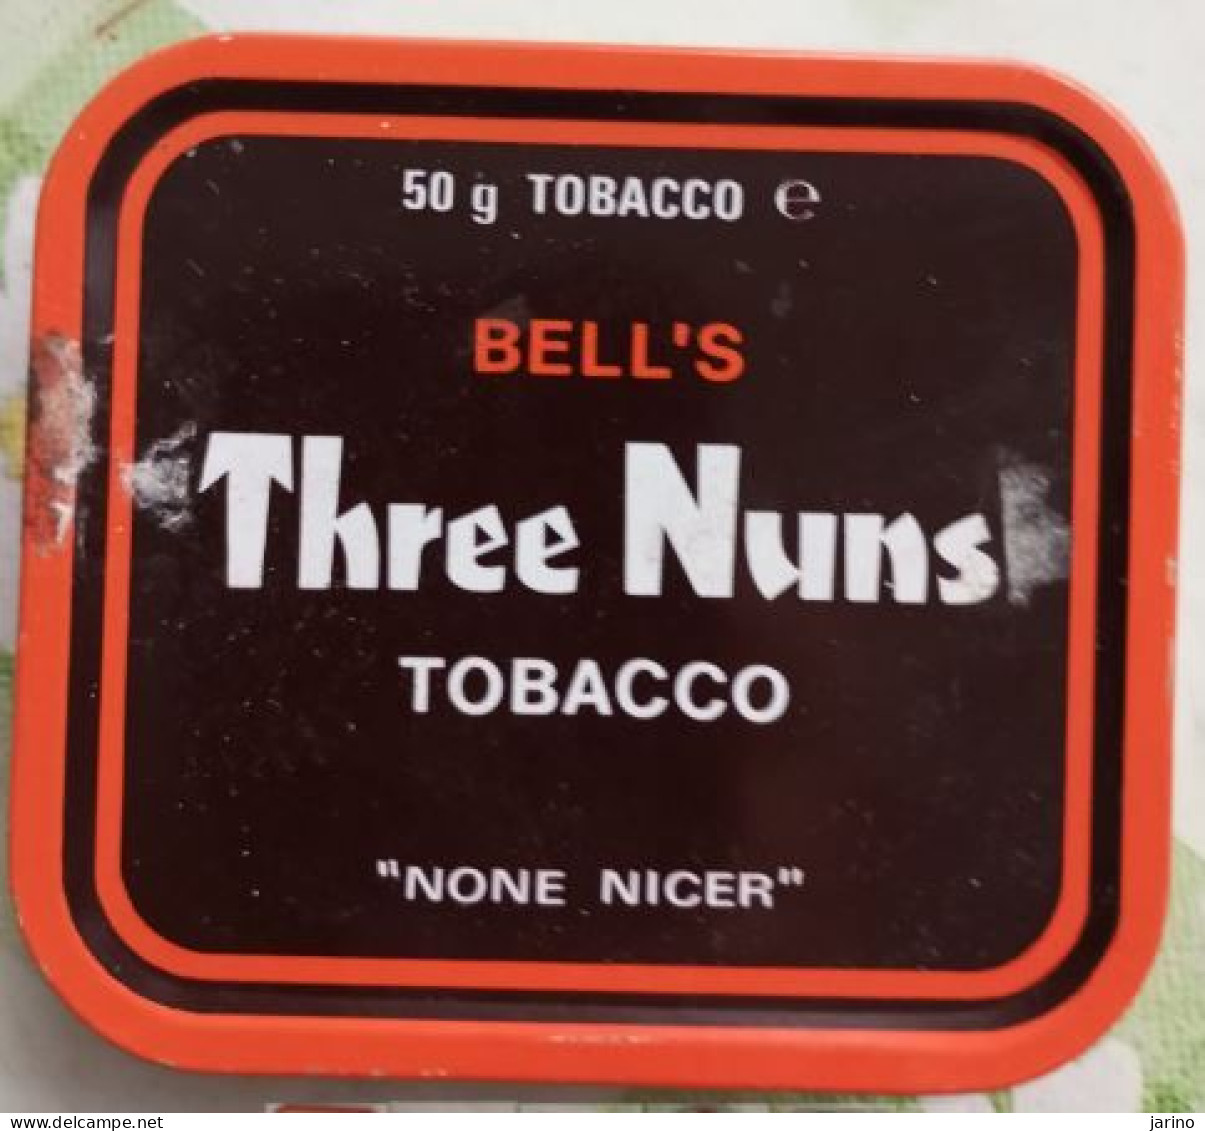 Ancient Empty Metal Tobacco Box BELL'S Three Nuns Tobacco, "None Nicer", Made In England, 10 X 8 X 3 Cm - Boites à Tabac Vides